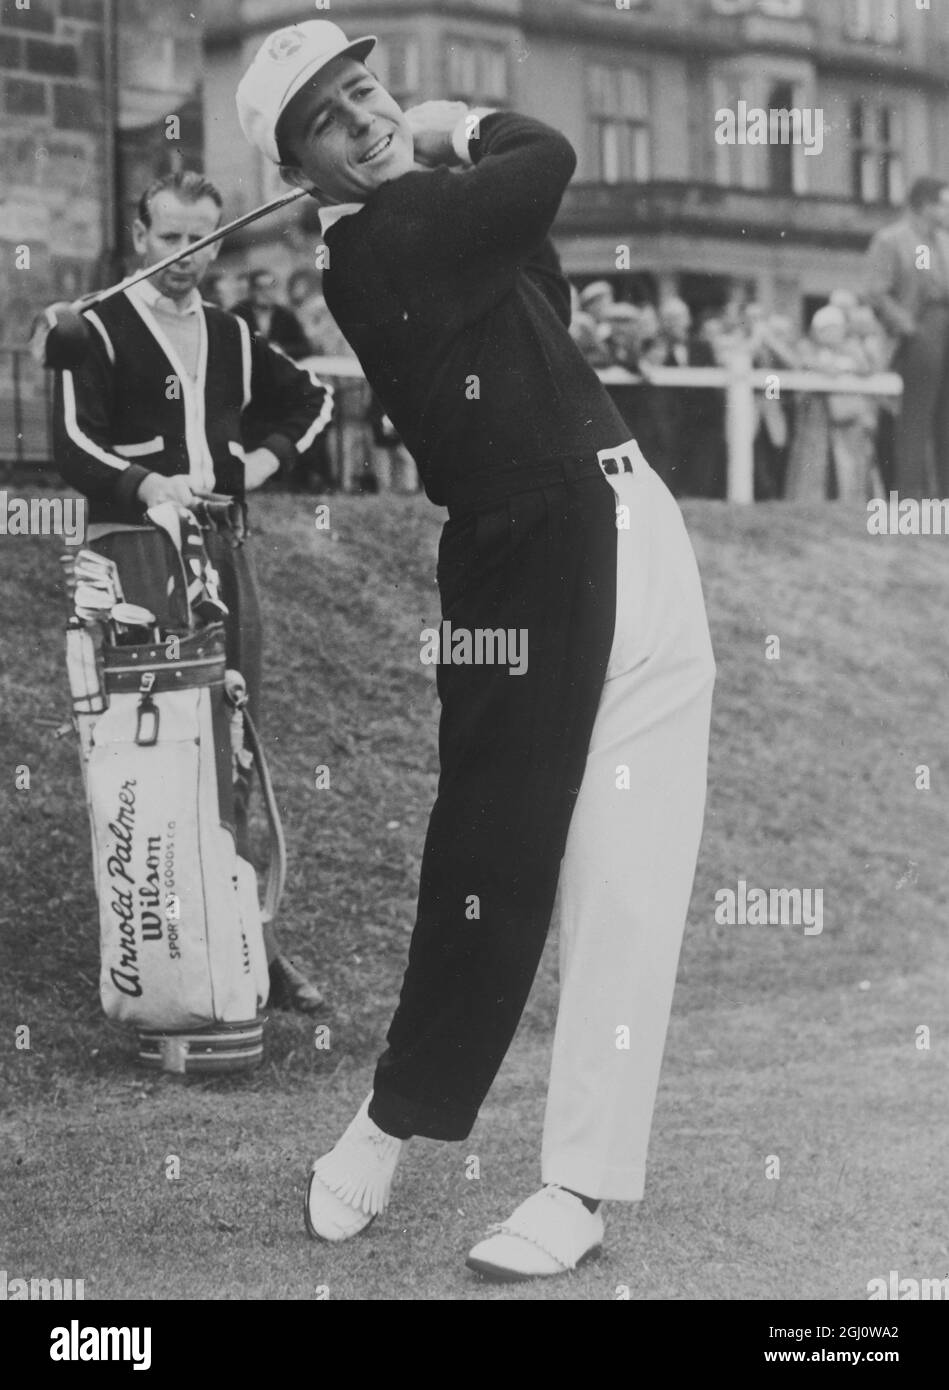 GOLF ST ANDREWS CHAMPIONSHIPS G PLAYER IN 2 COLOURED TROUSE 5 JULY 1960 Stock Photo